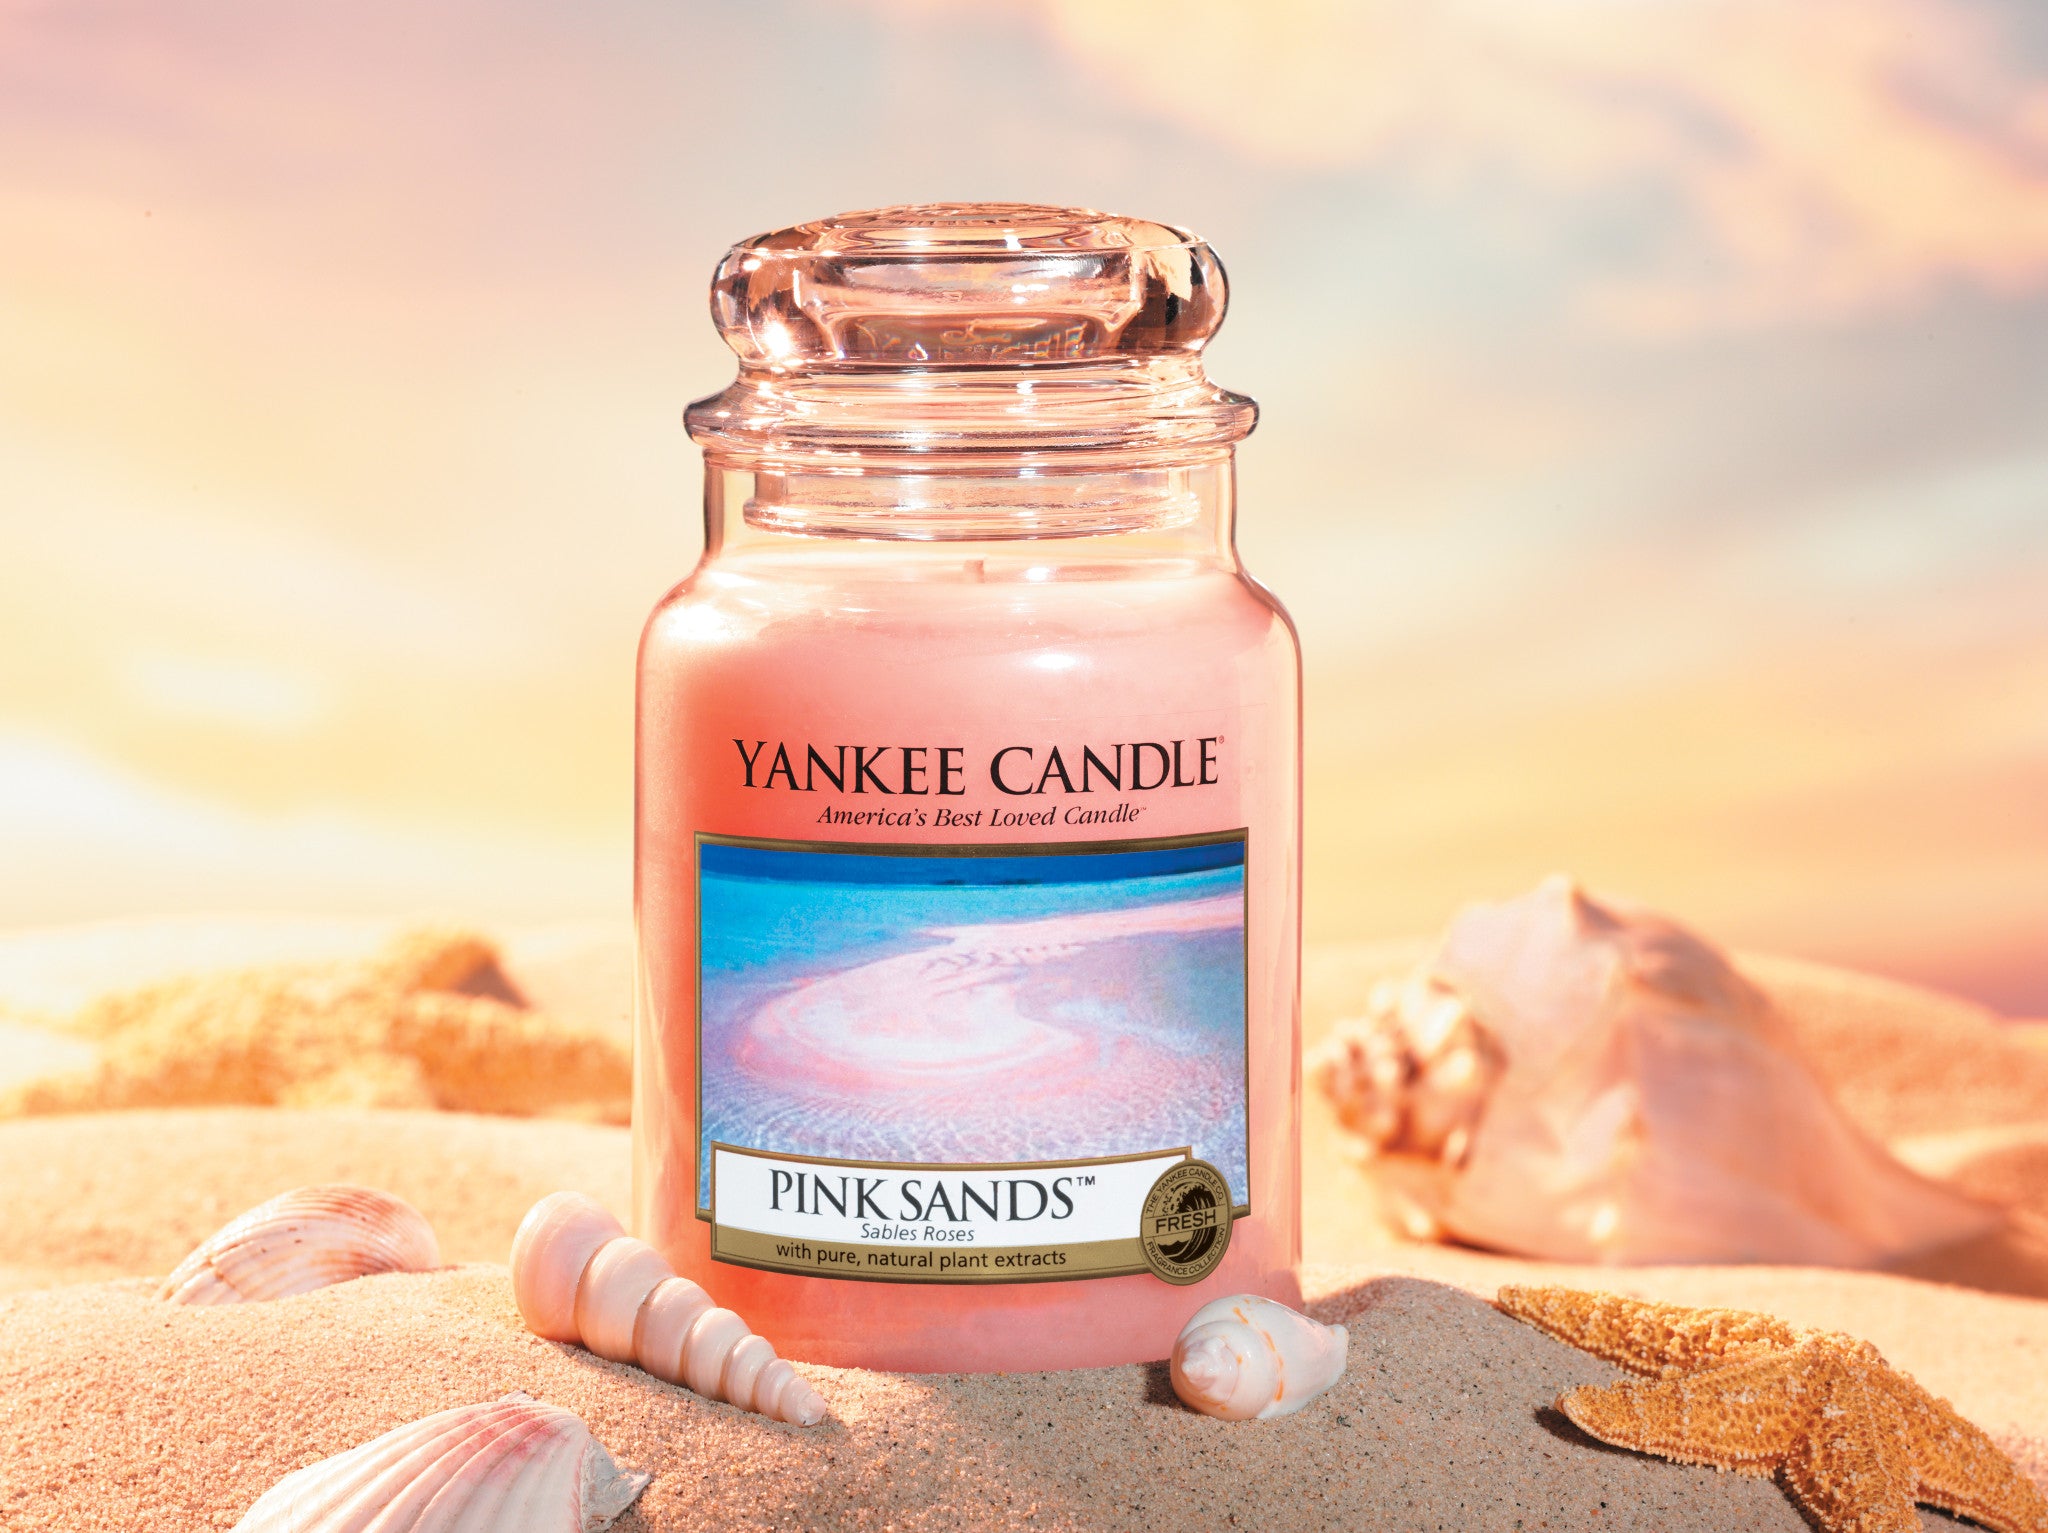 PINK SANDS -Yankee Candle- Giara Piccola – Candle With Care